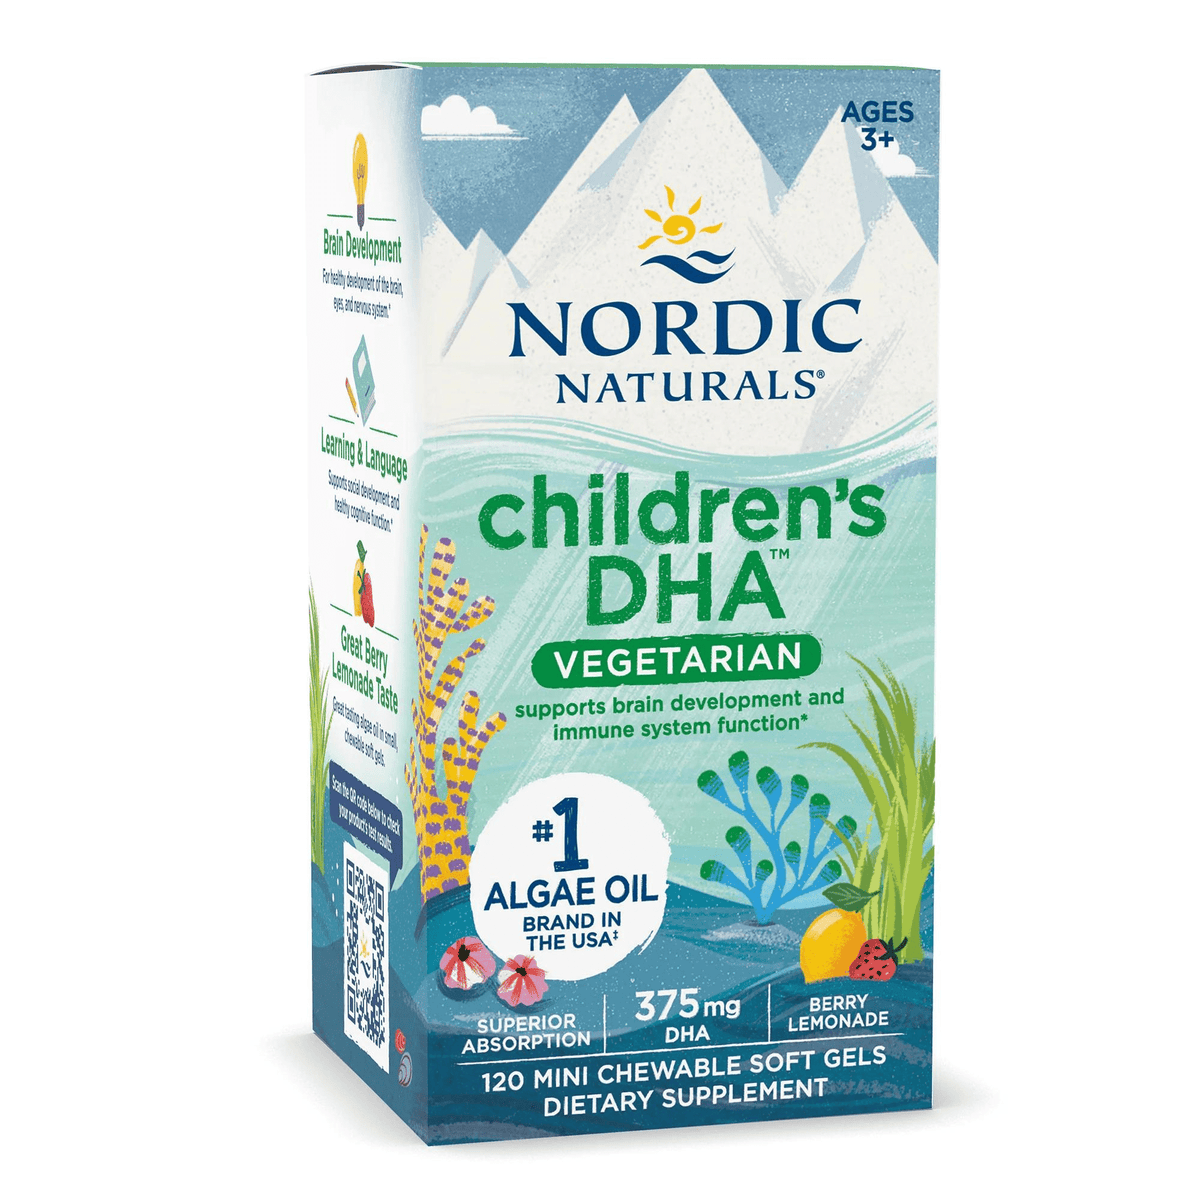 Primary Image of Children's DHA Vegetarian Mini Chewable Soft Gels